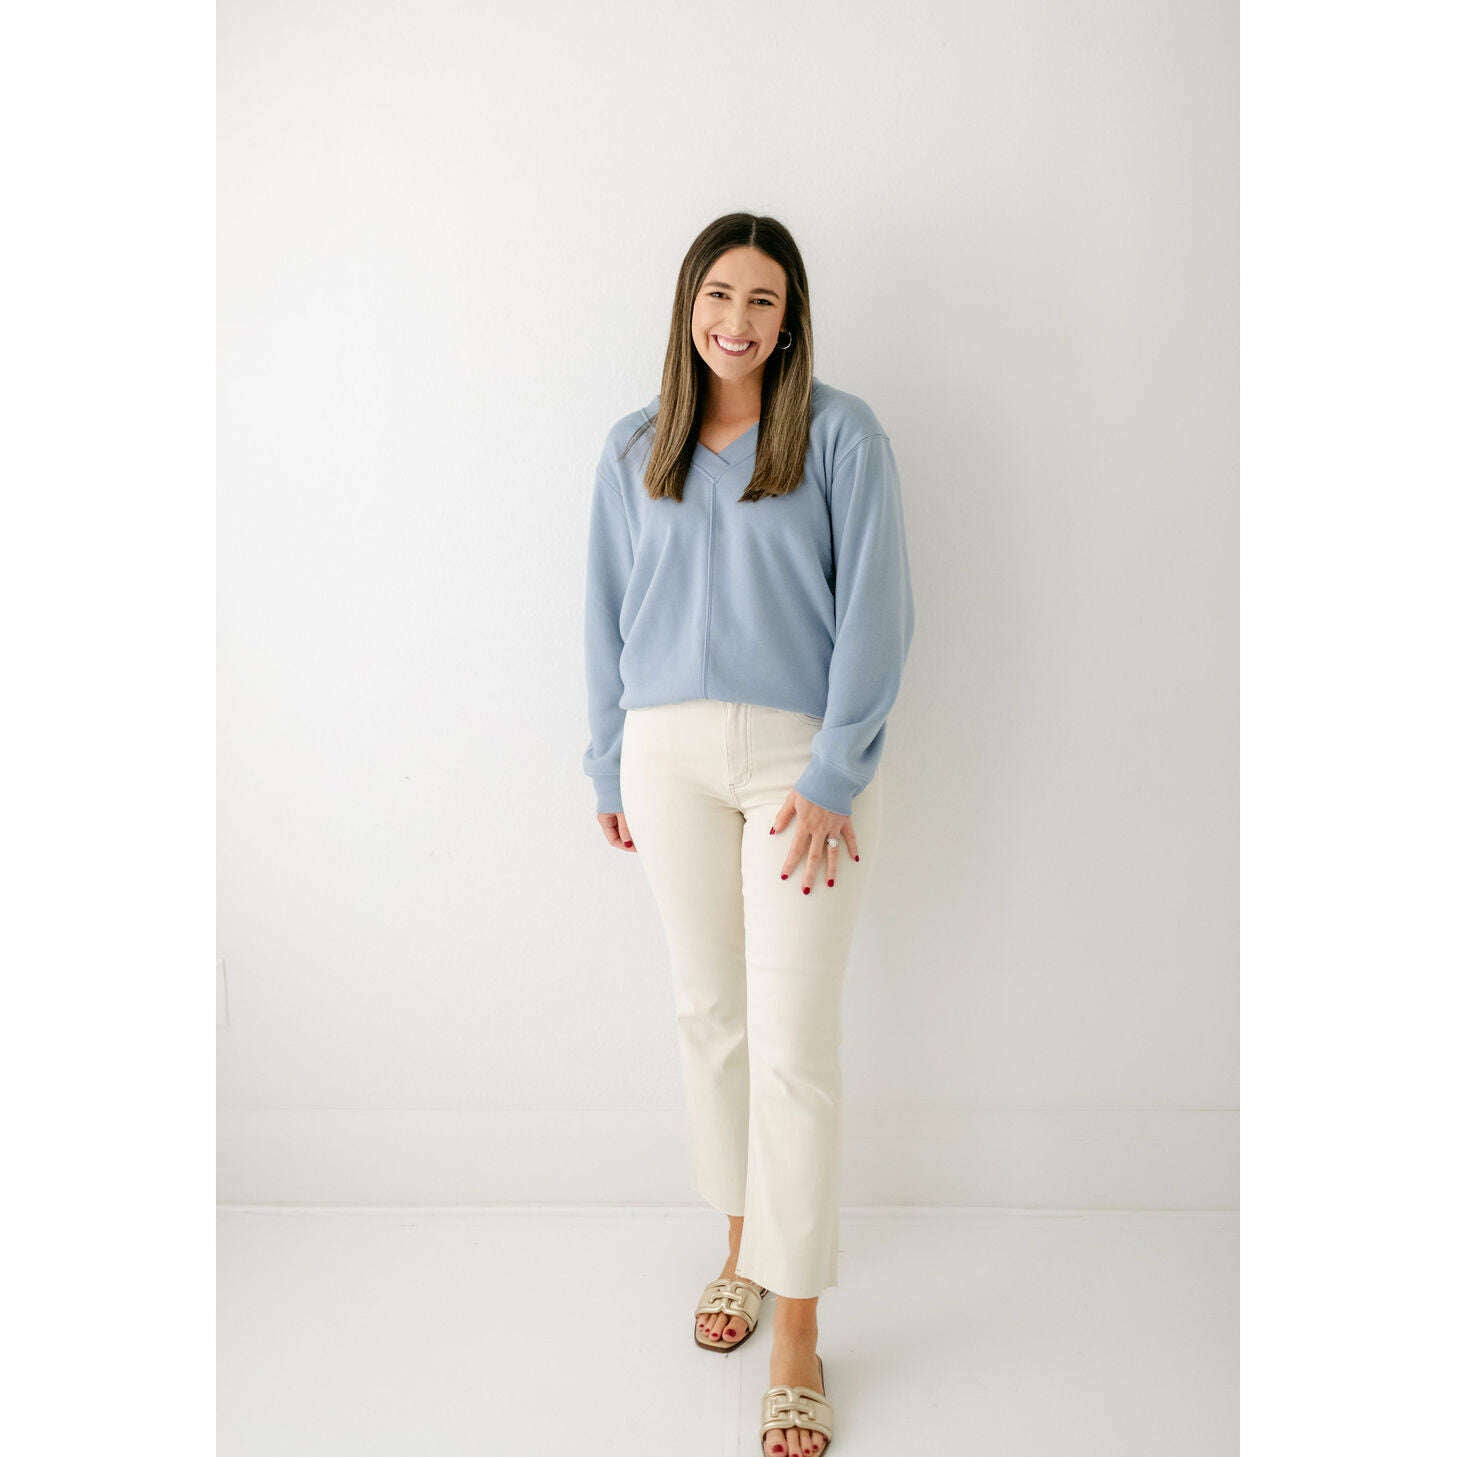 8.28 Boutique:Z Supply,Z-Supply Off the Clock Sweatshirt in Stormy Blue,